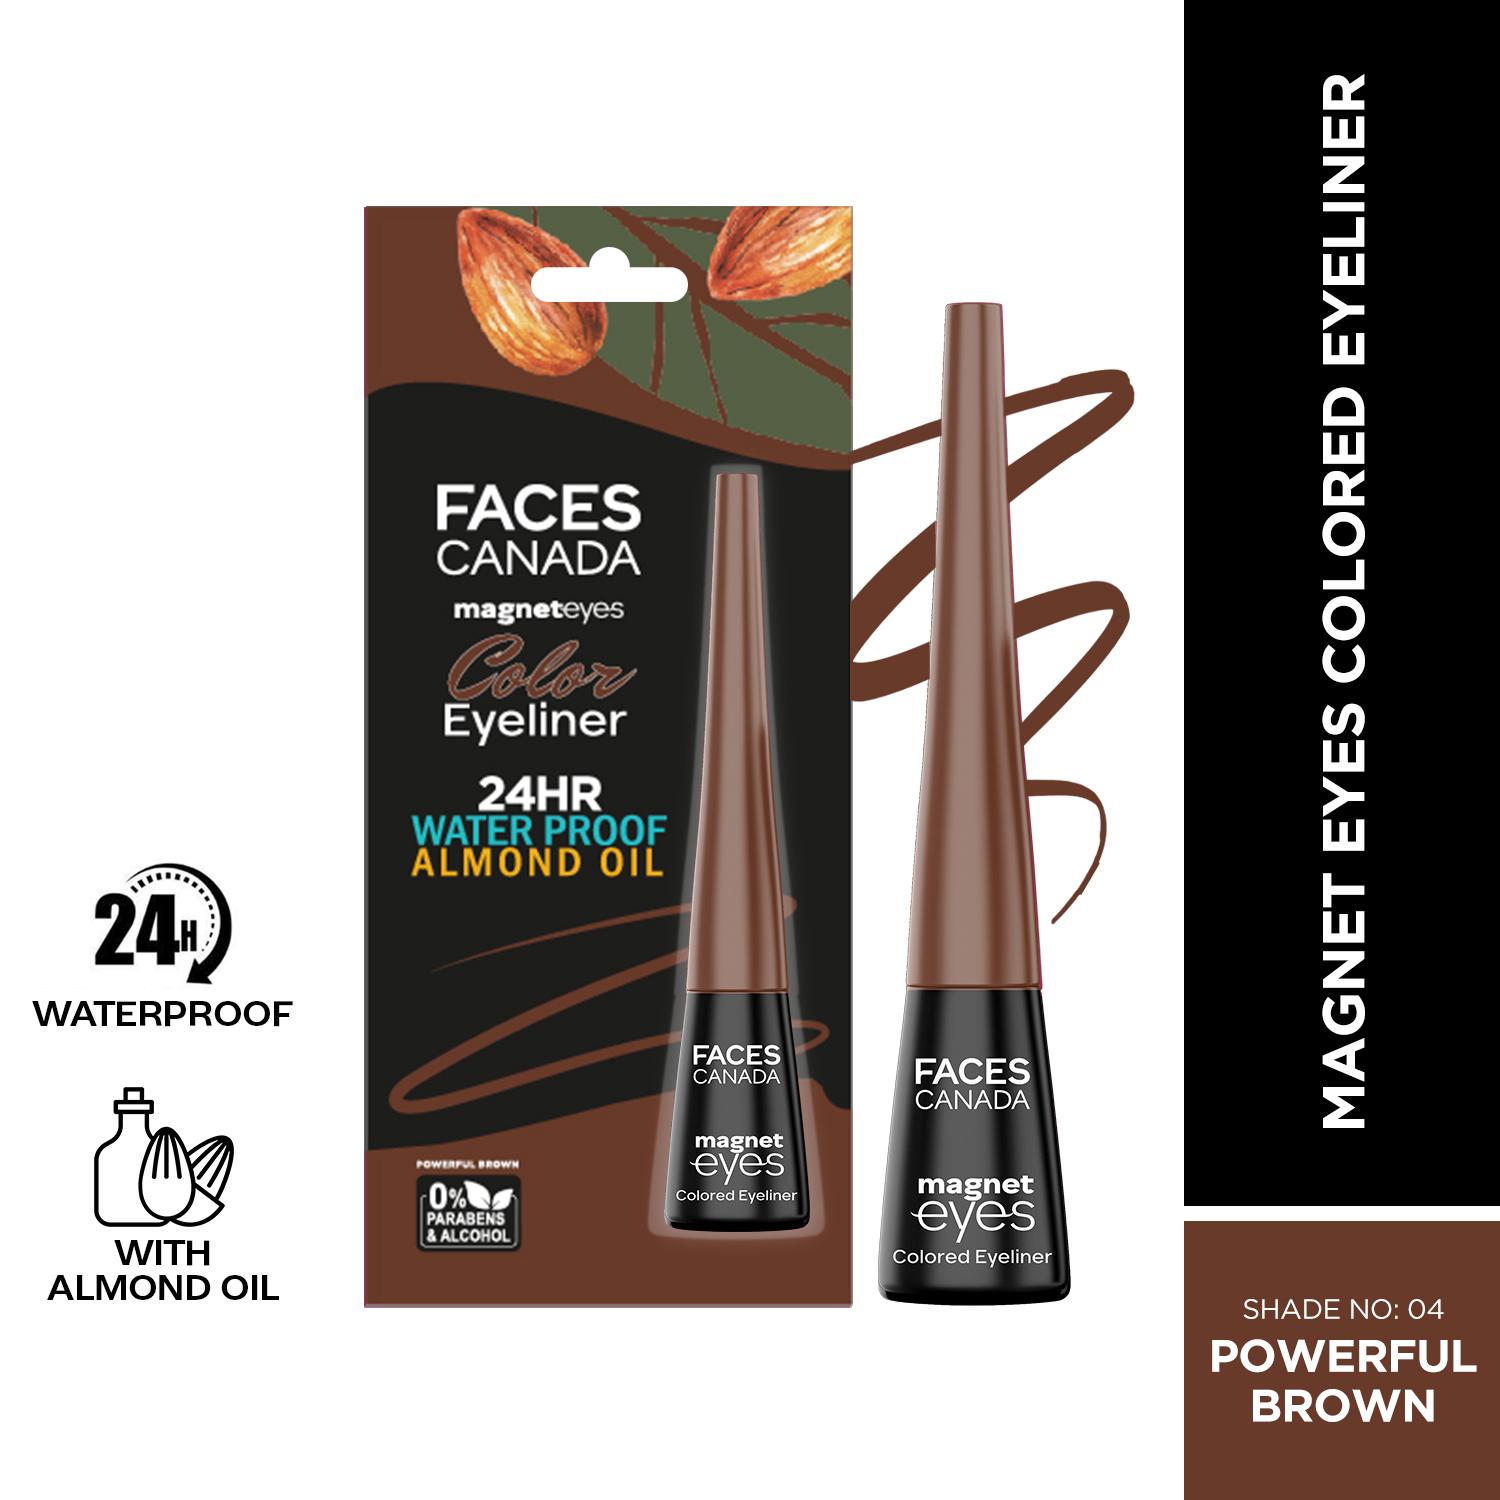 Faces Canada | Faces Canada Magneteyes Color Eyeliner, Glossy Finish, 24HR Long-lasting - Powerful Brown (4 ml)